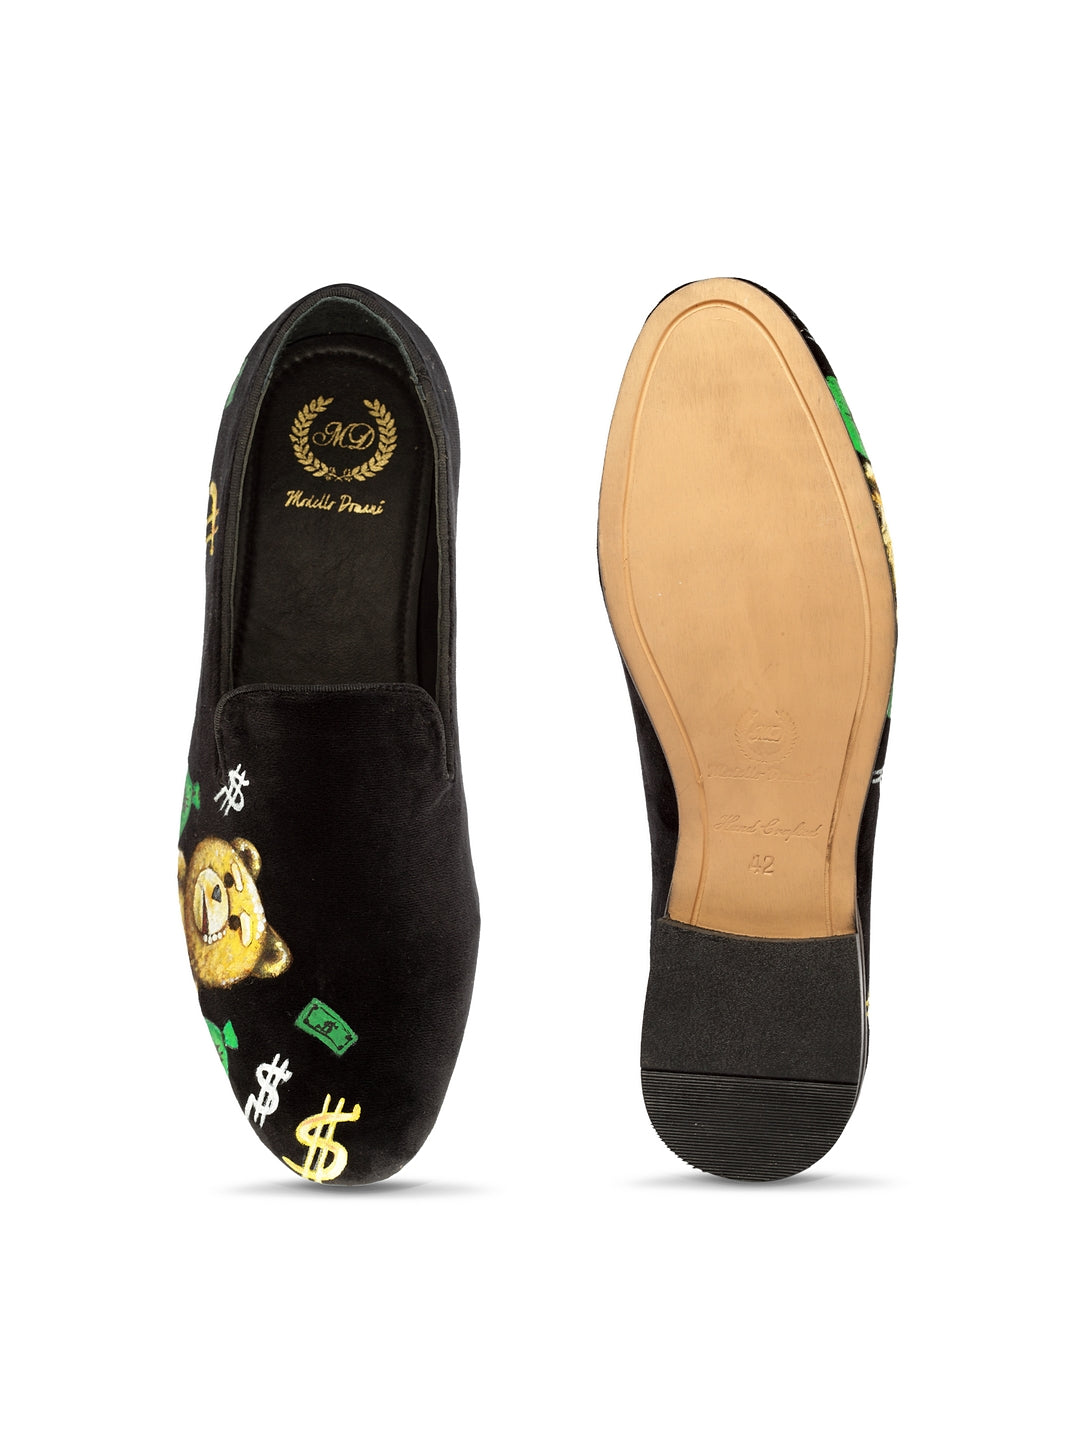 Luxury Hand Painted Slipons (Made To Order)